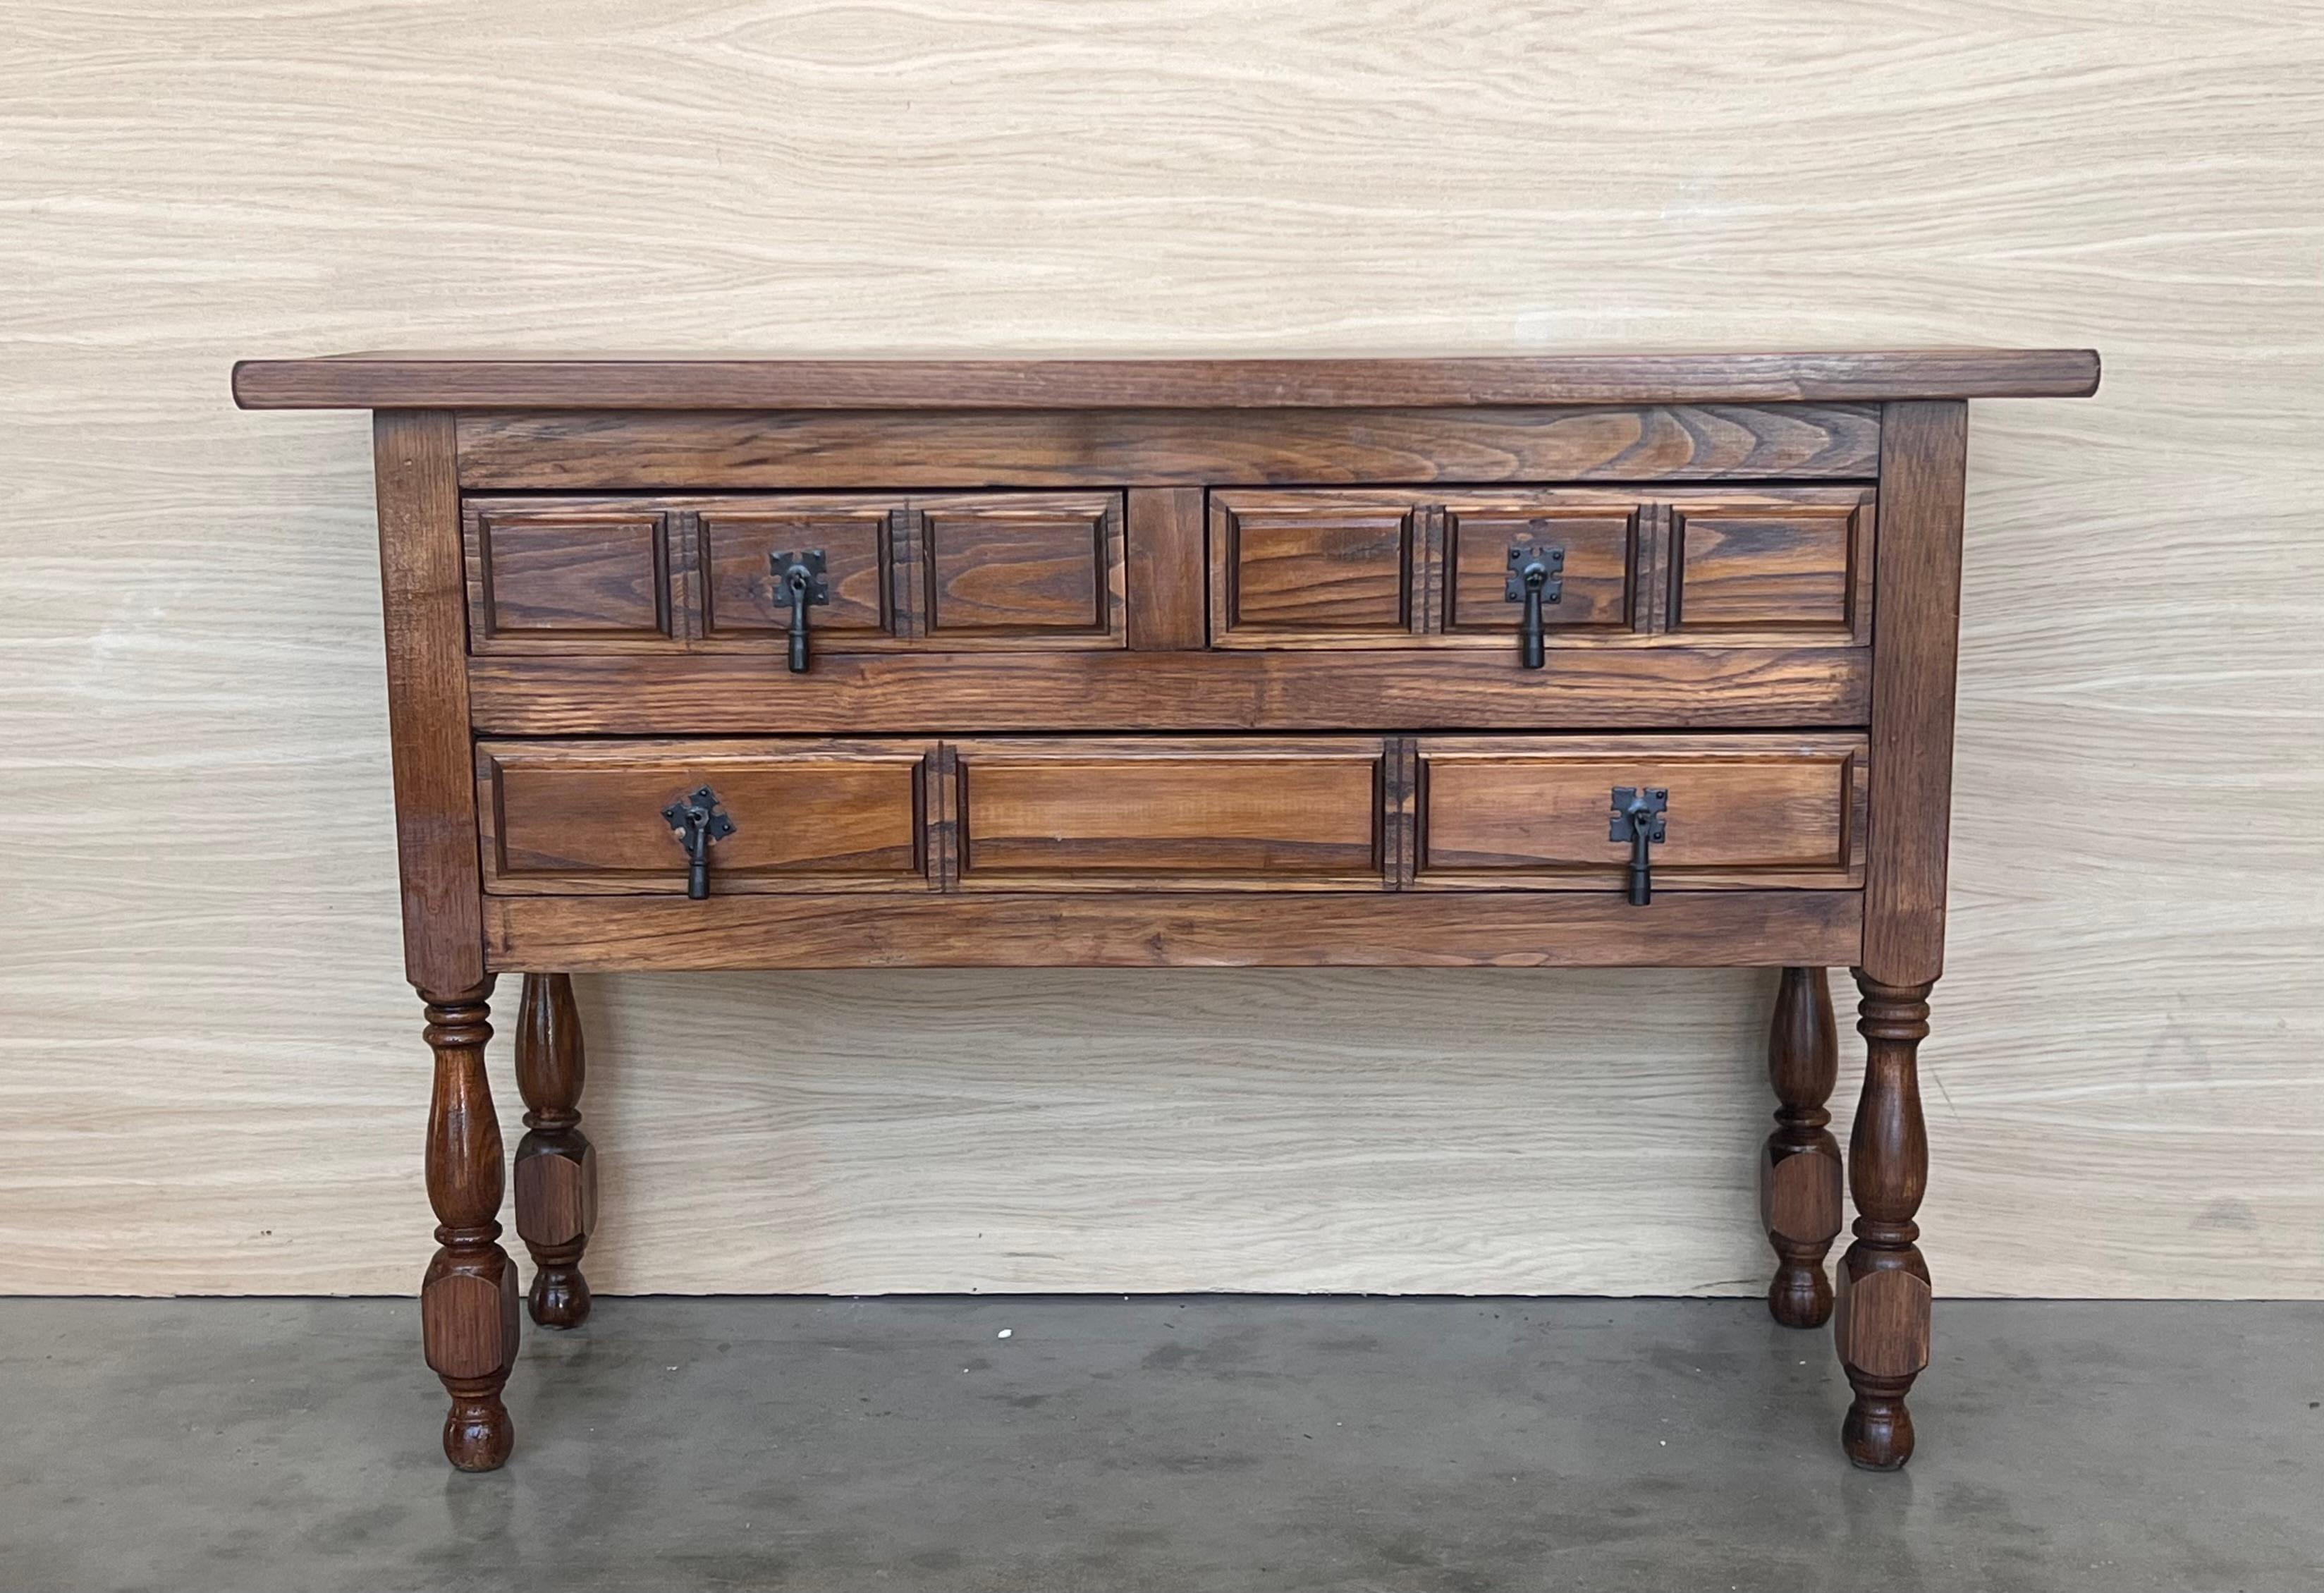 Baroque Revival 19th Century Catalan Spanish Carved Walnut Console Sofa Table, Four Drawers For Sale